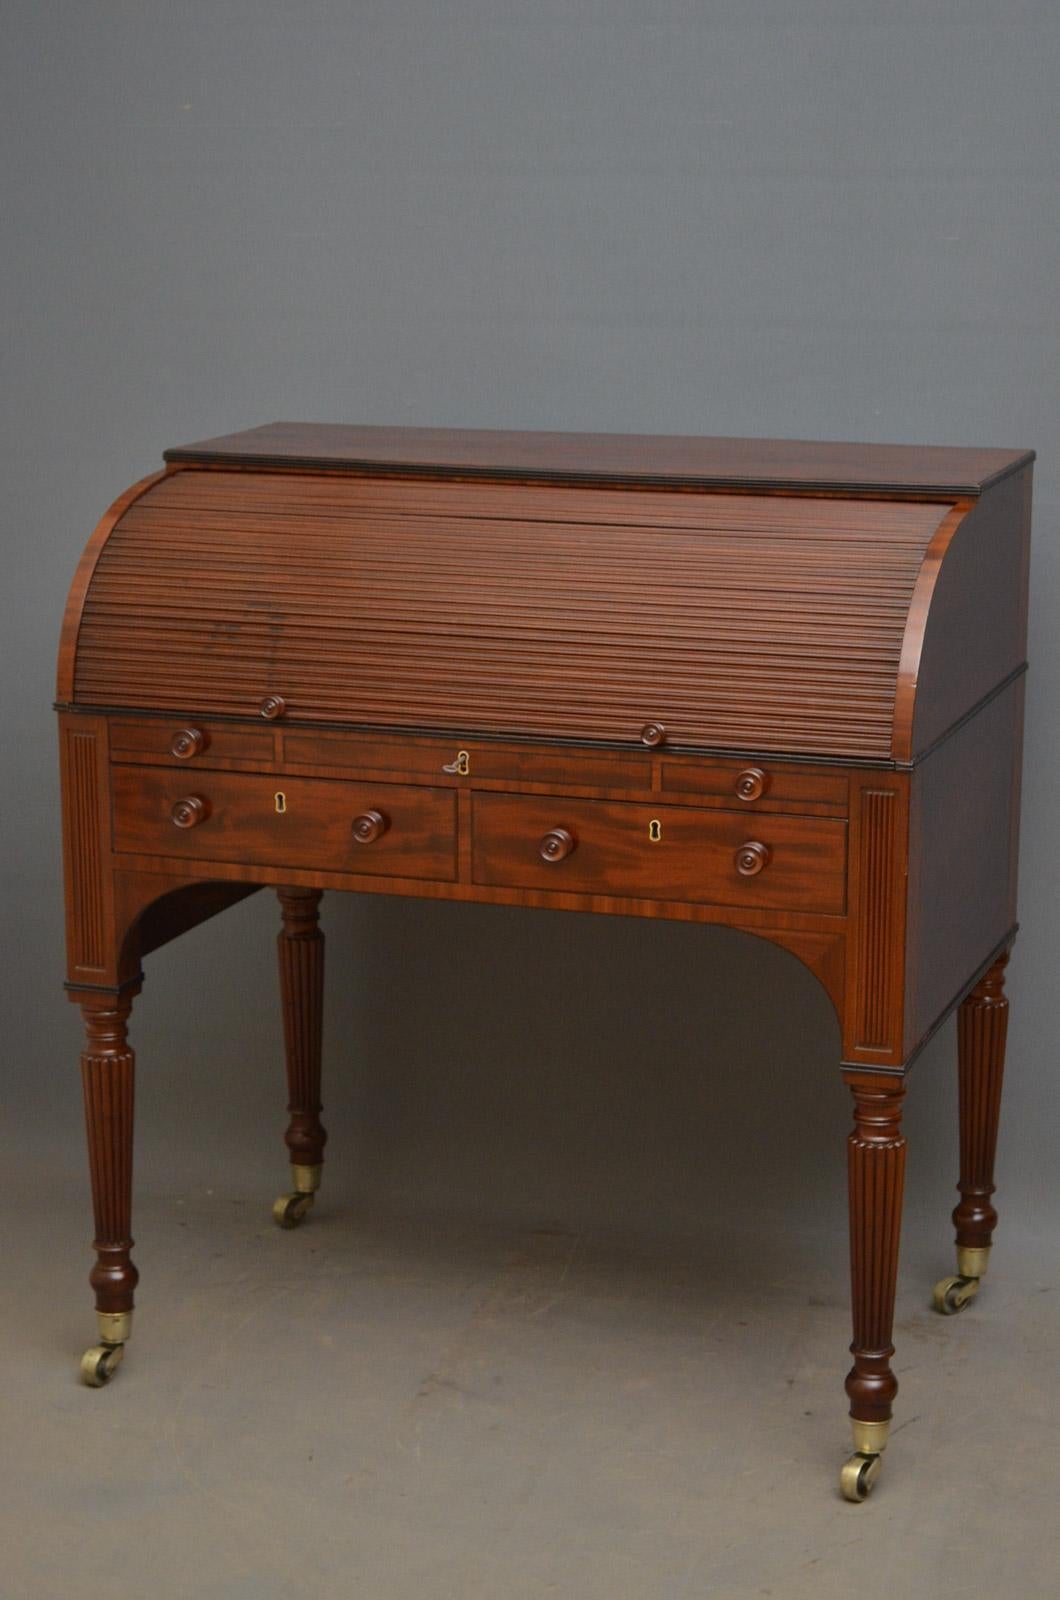 Sn4593, fine quality and very unusual, Regency, mahogany writing desk /bureau, having tambour top enclosing satinwood and string drawers, pigeon holes and adjustable writing surface in black tooled leather, above 2 mahogany lined drawers flanked by